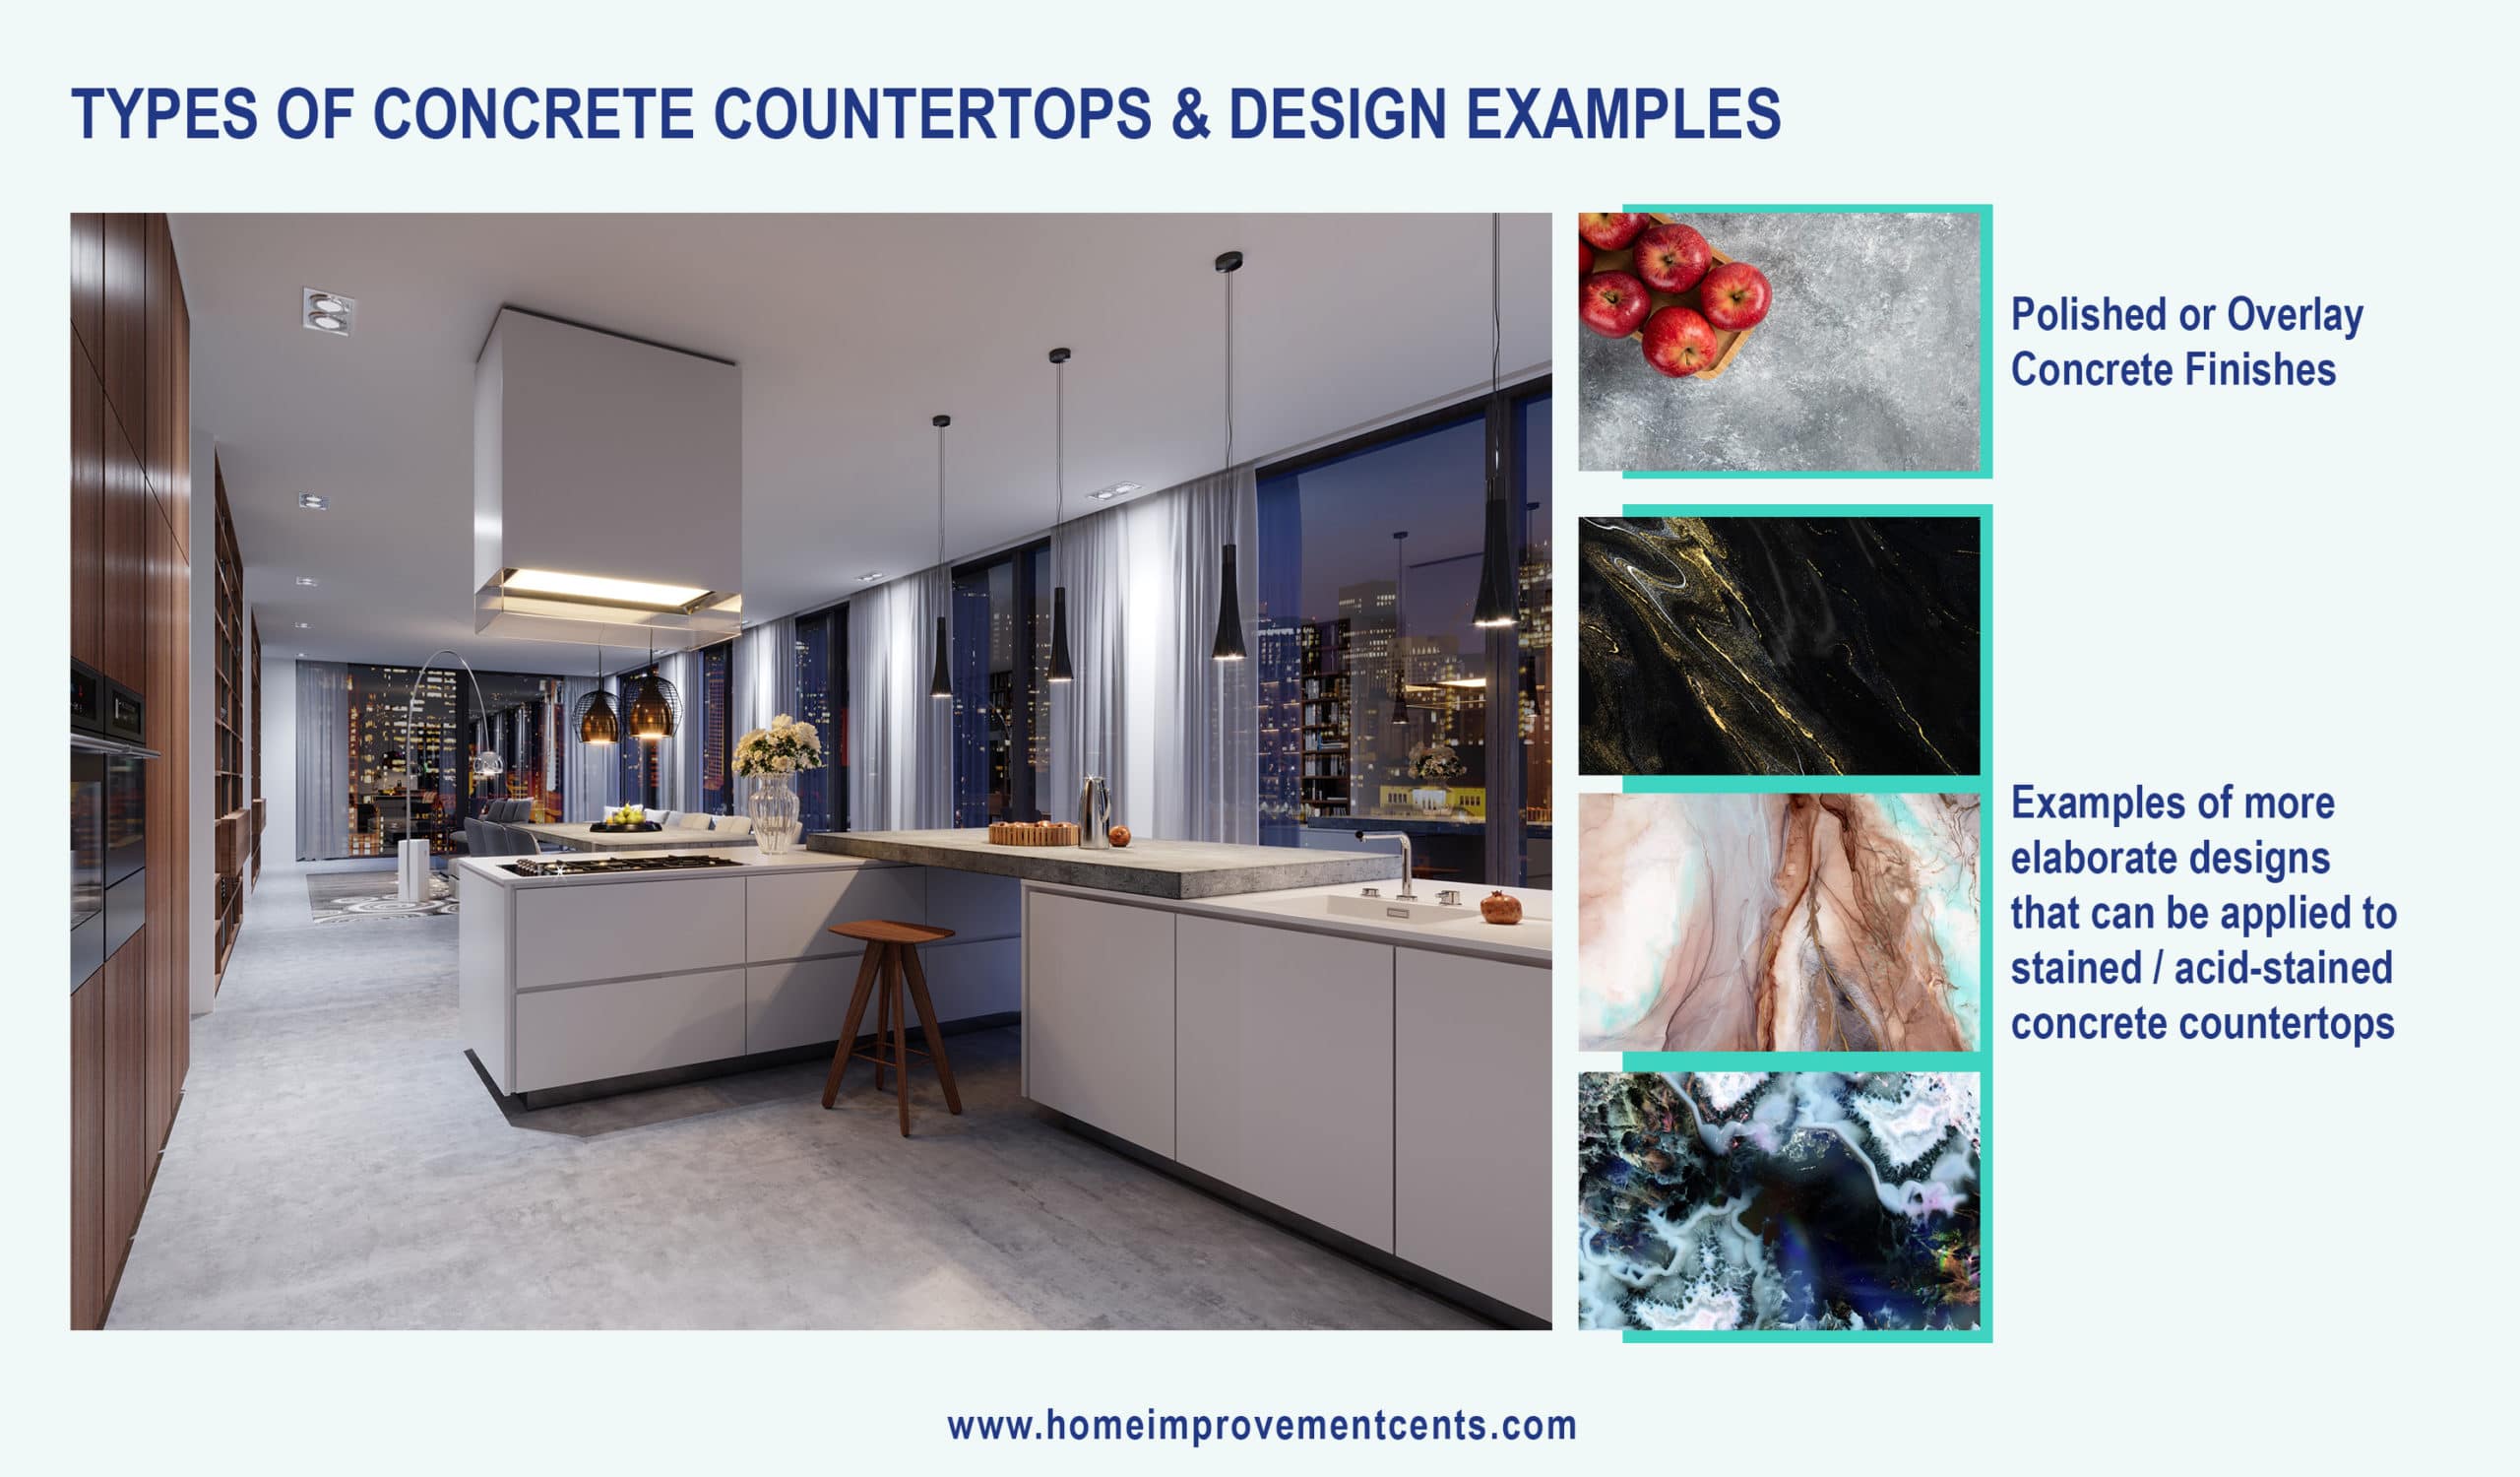 Shows the different styles of concrete countertops